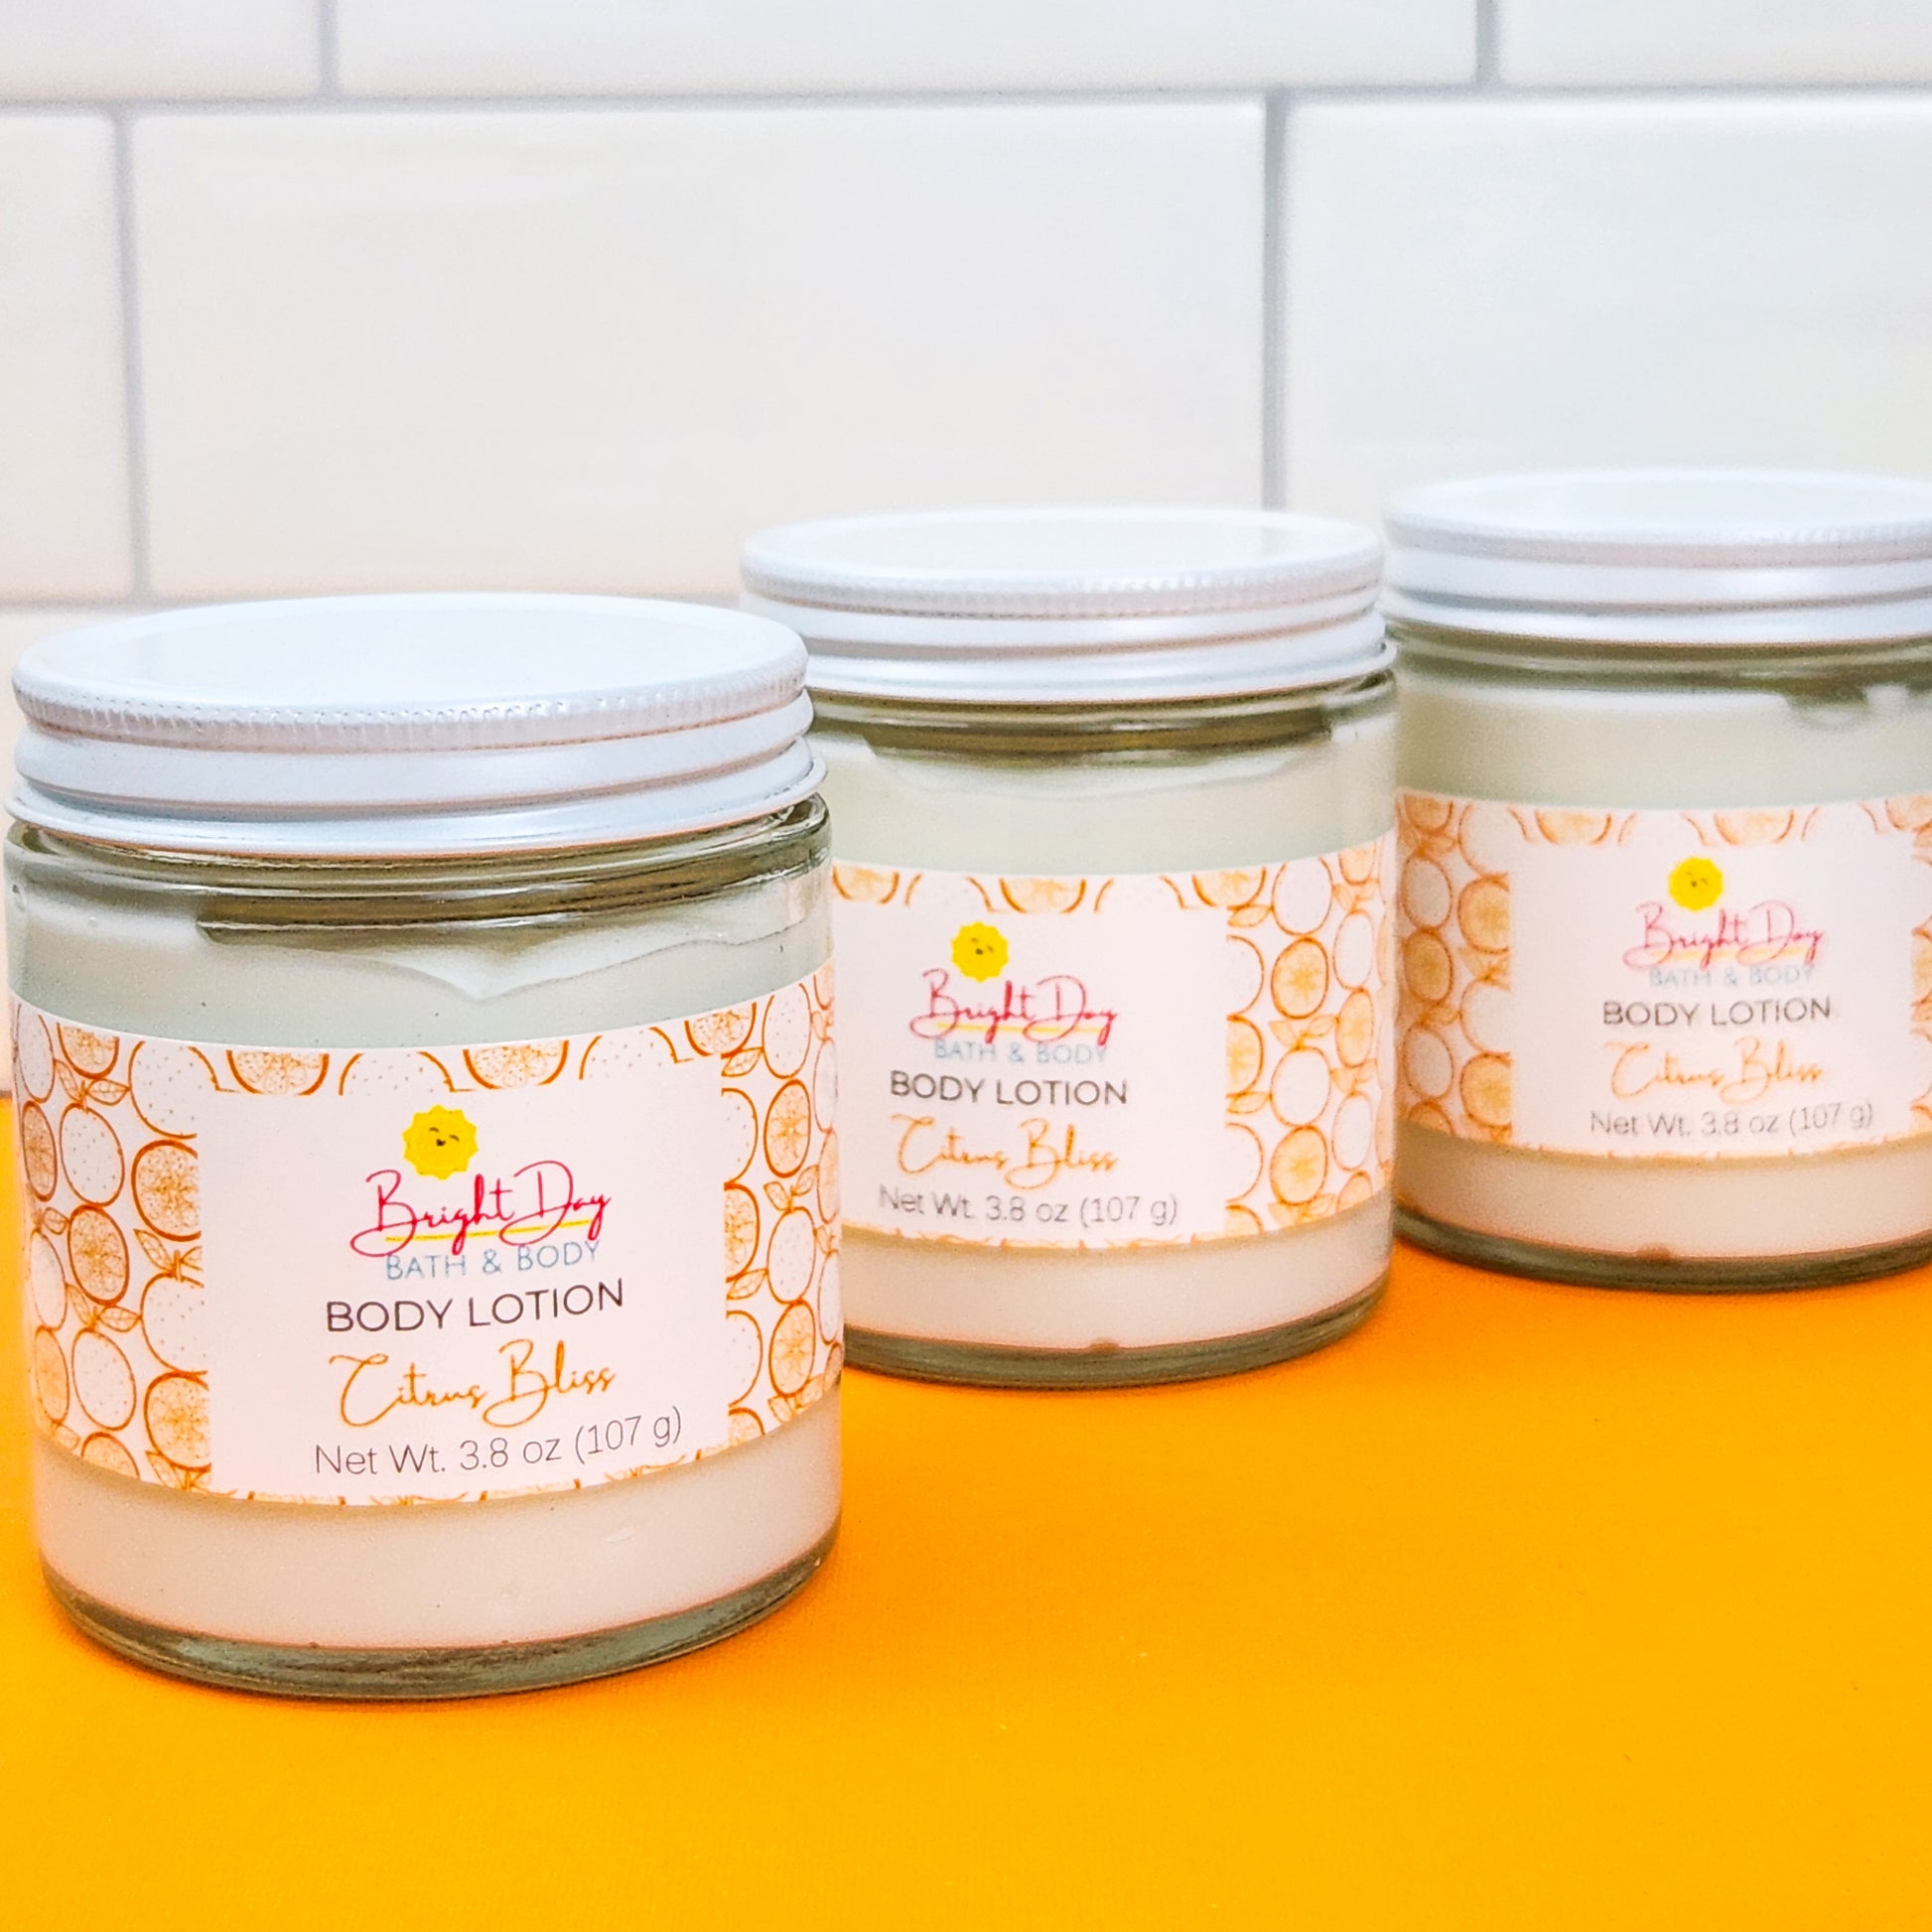 Three jars of Citrus Bliss Body Lotion on a white and orange background.